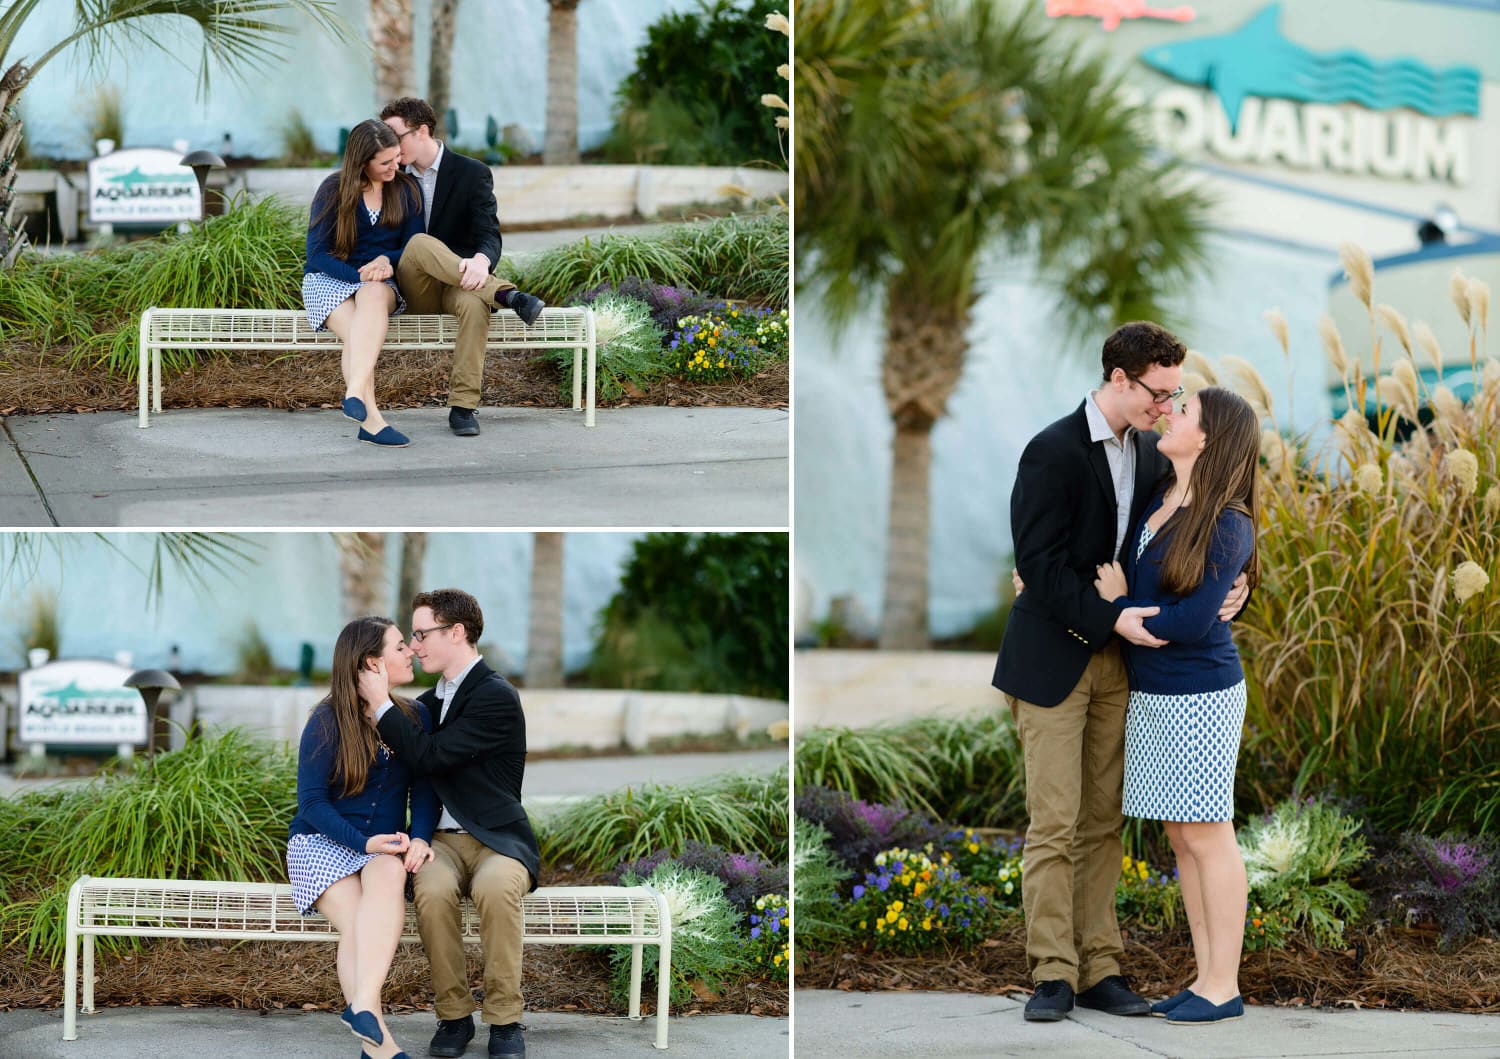 Engagement pictures at Ripley's Aquarium in Myrtle Beach